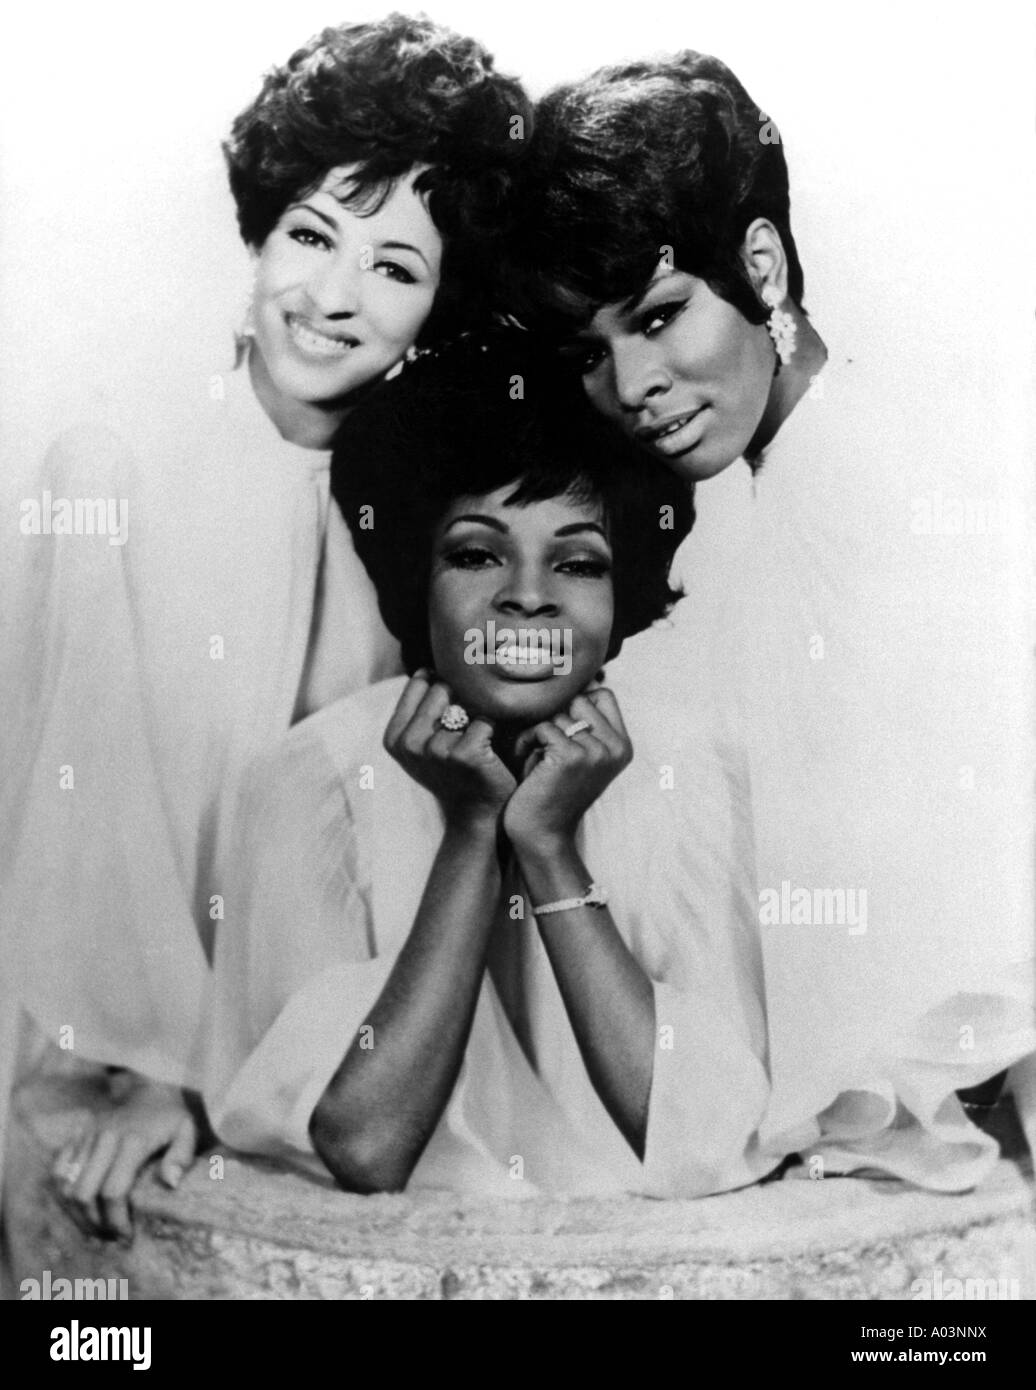 MARTHA REEVES AND THE VANDELLAS US music group Stock Photo